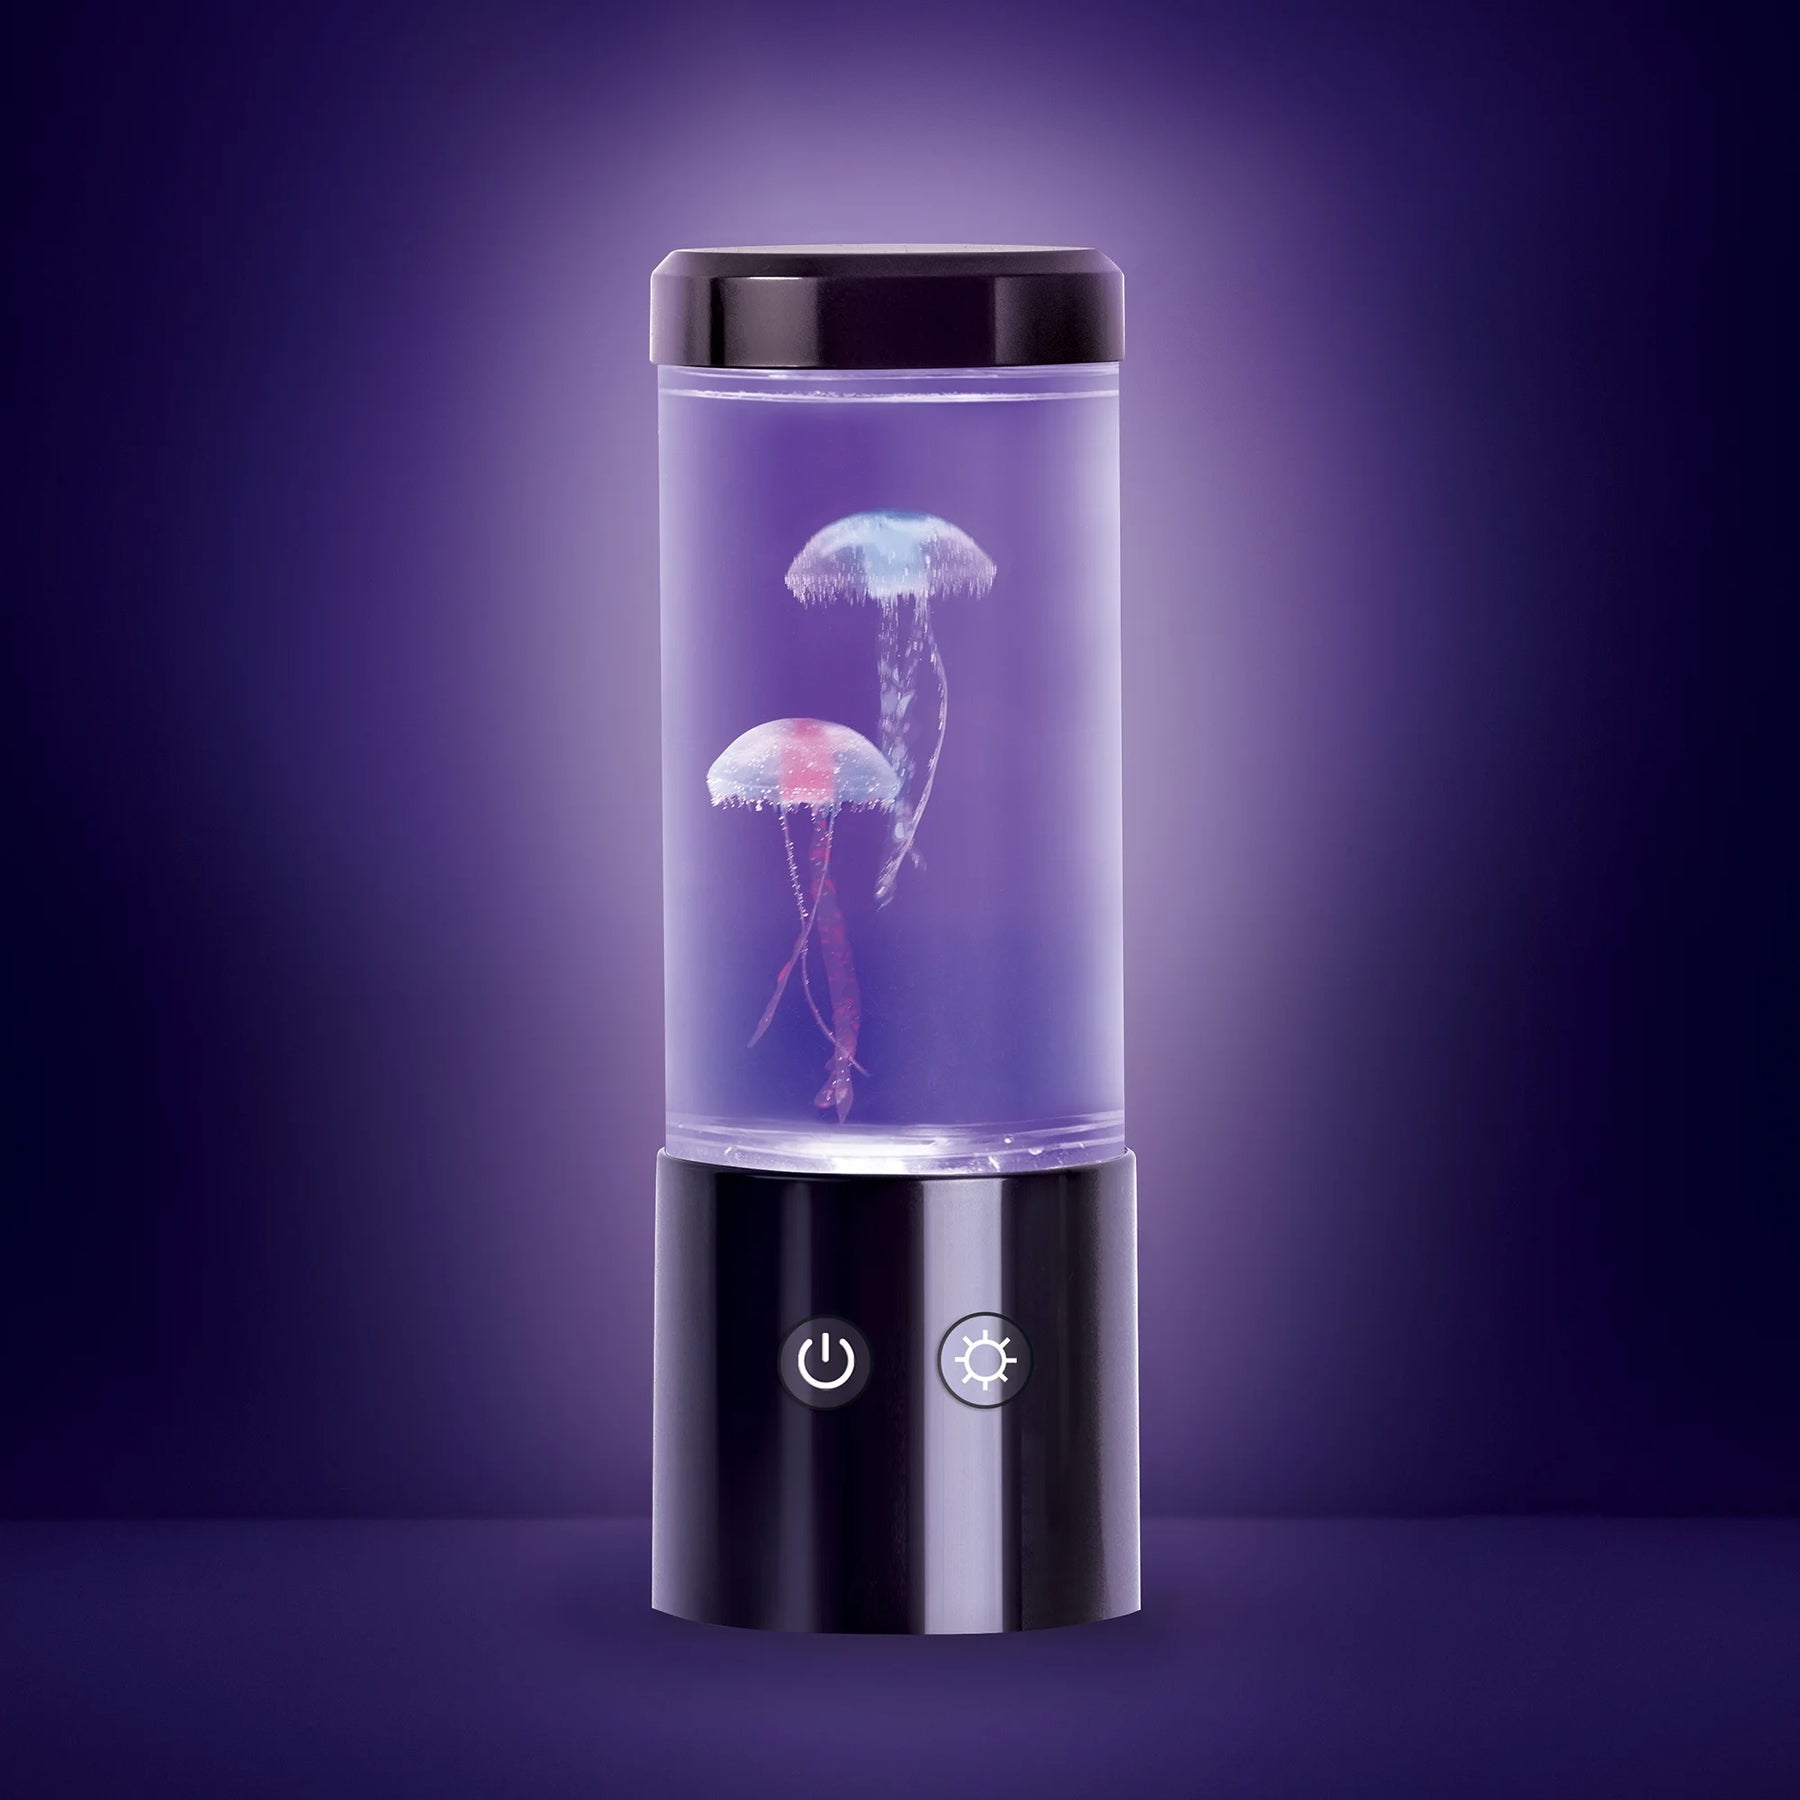 Jellyfish Lamp Motion & Multicolor Leds - Easy Mode Switching, USB Powered - 9"